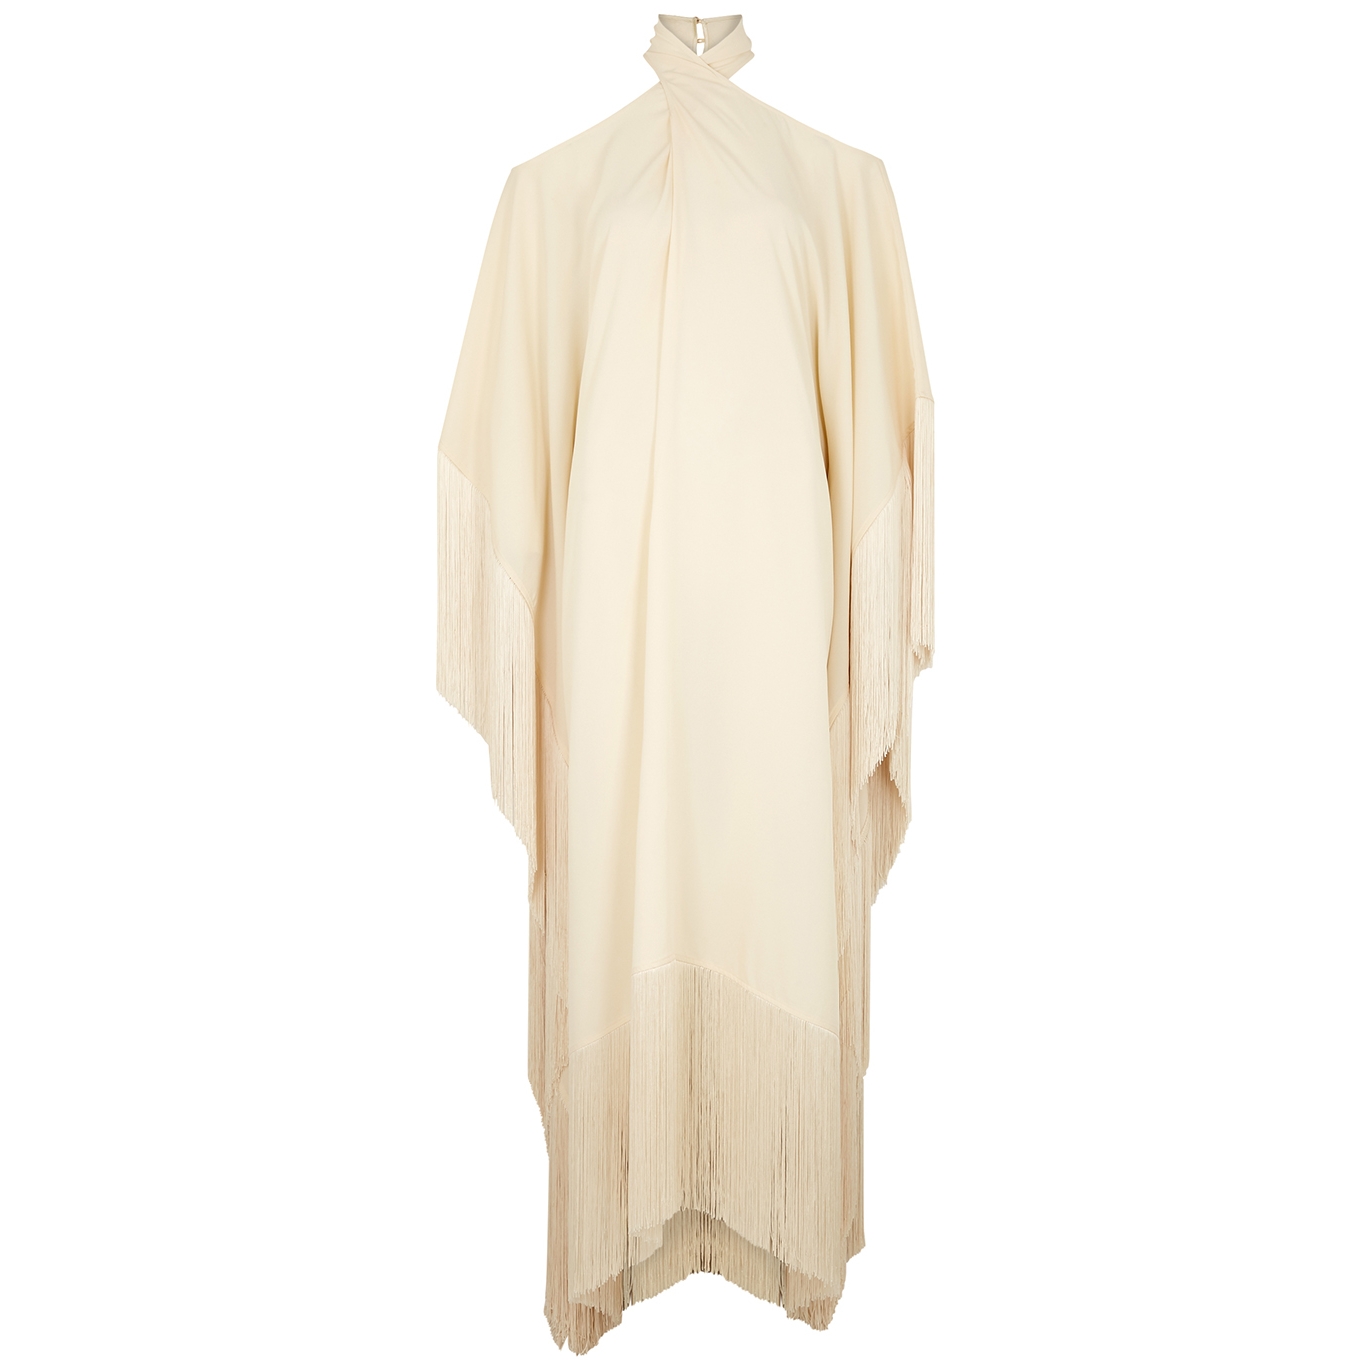 Taller Marmo Mambo Ivory Fringed Crepe De Chine Dress - One Size